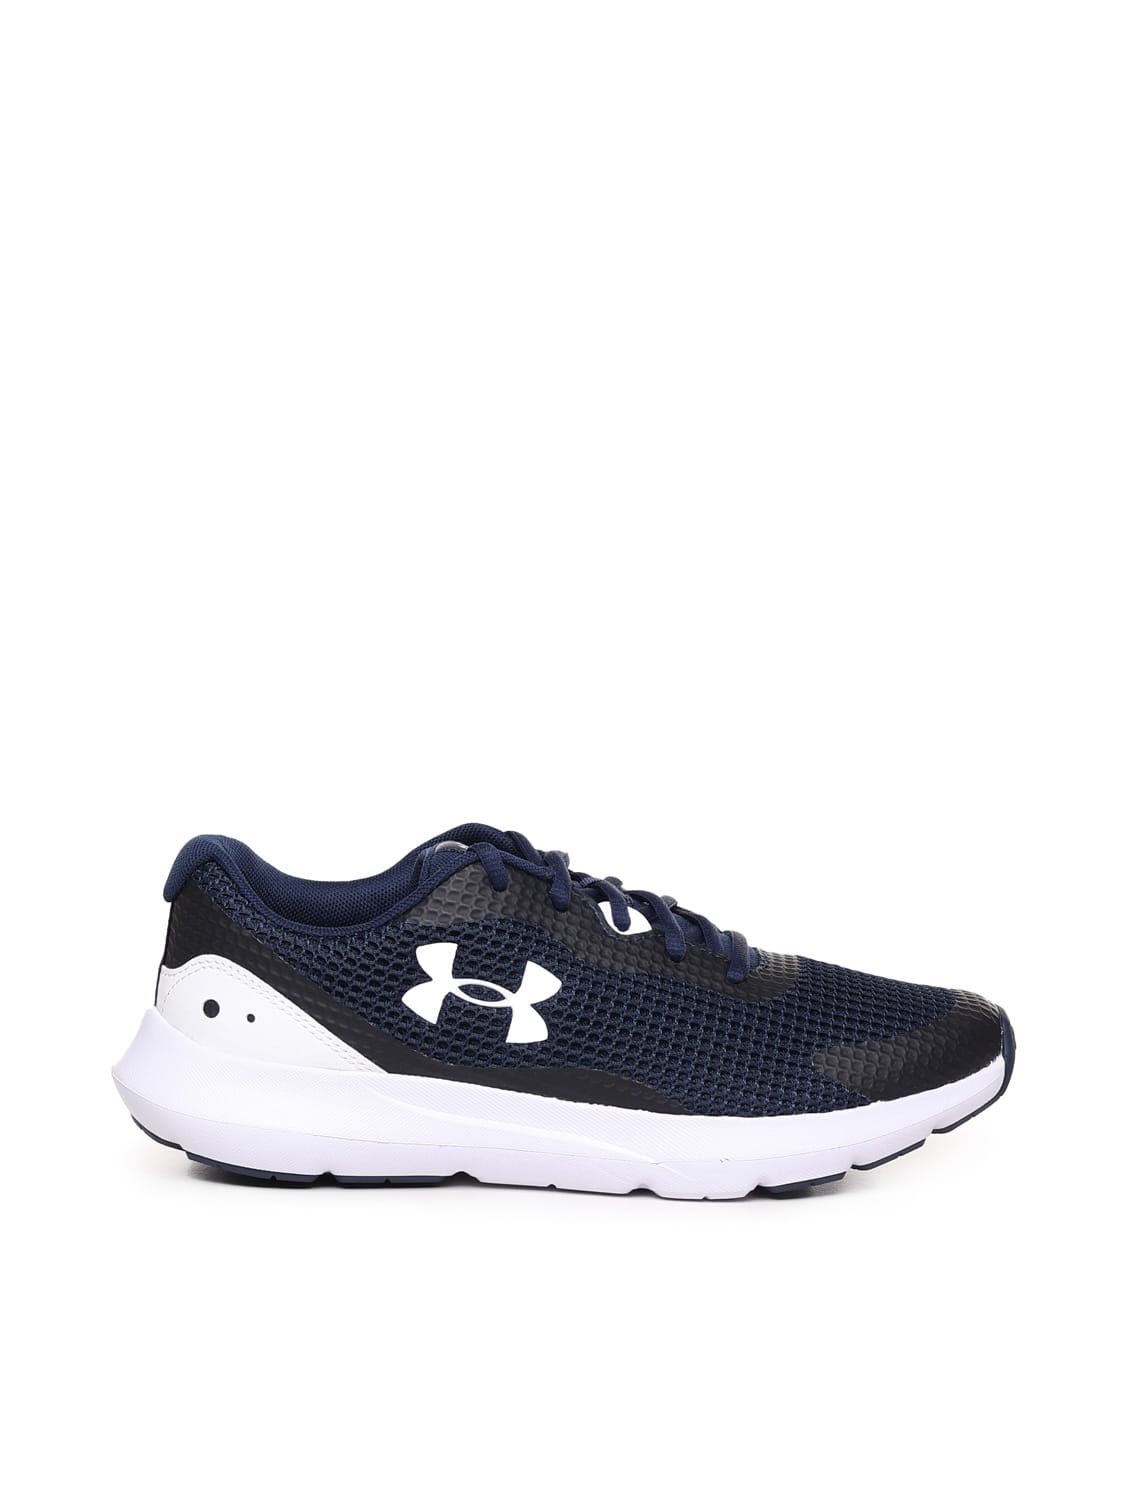 Under Armour Ua Surge Shoes In Blue